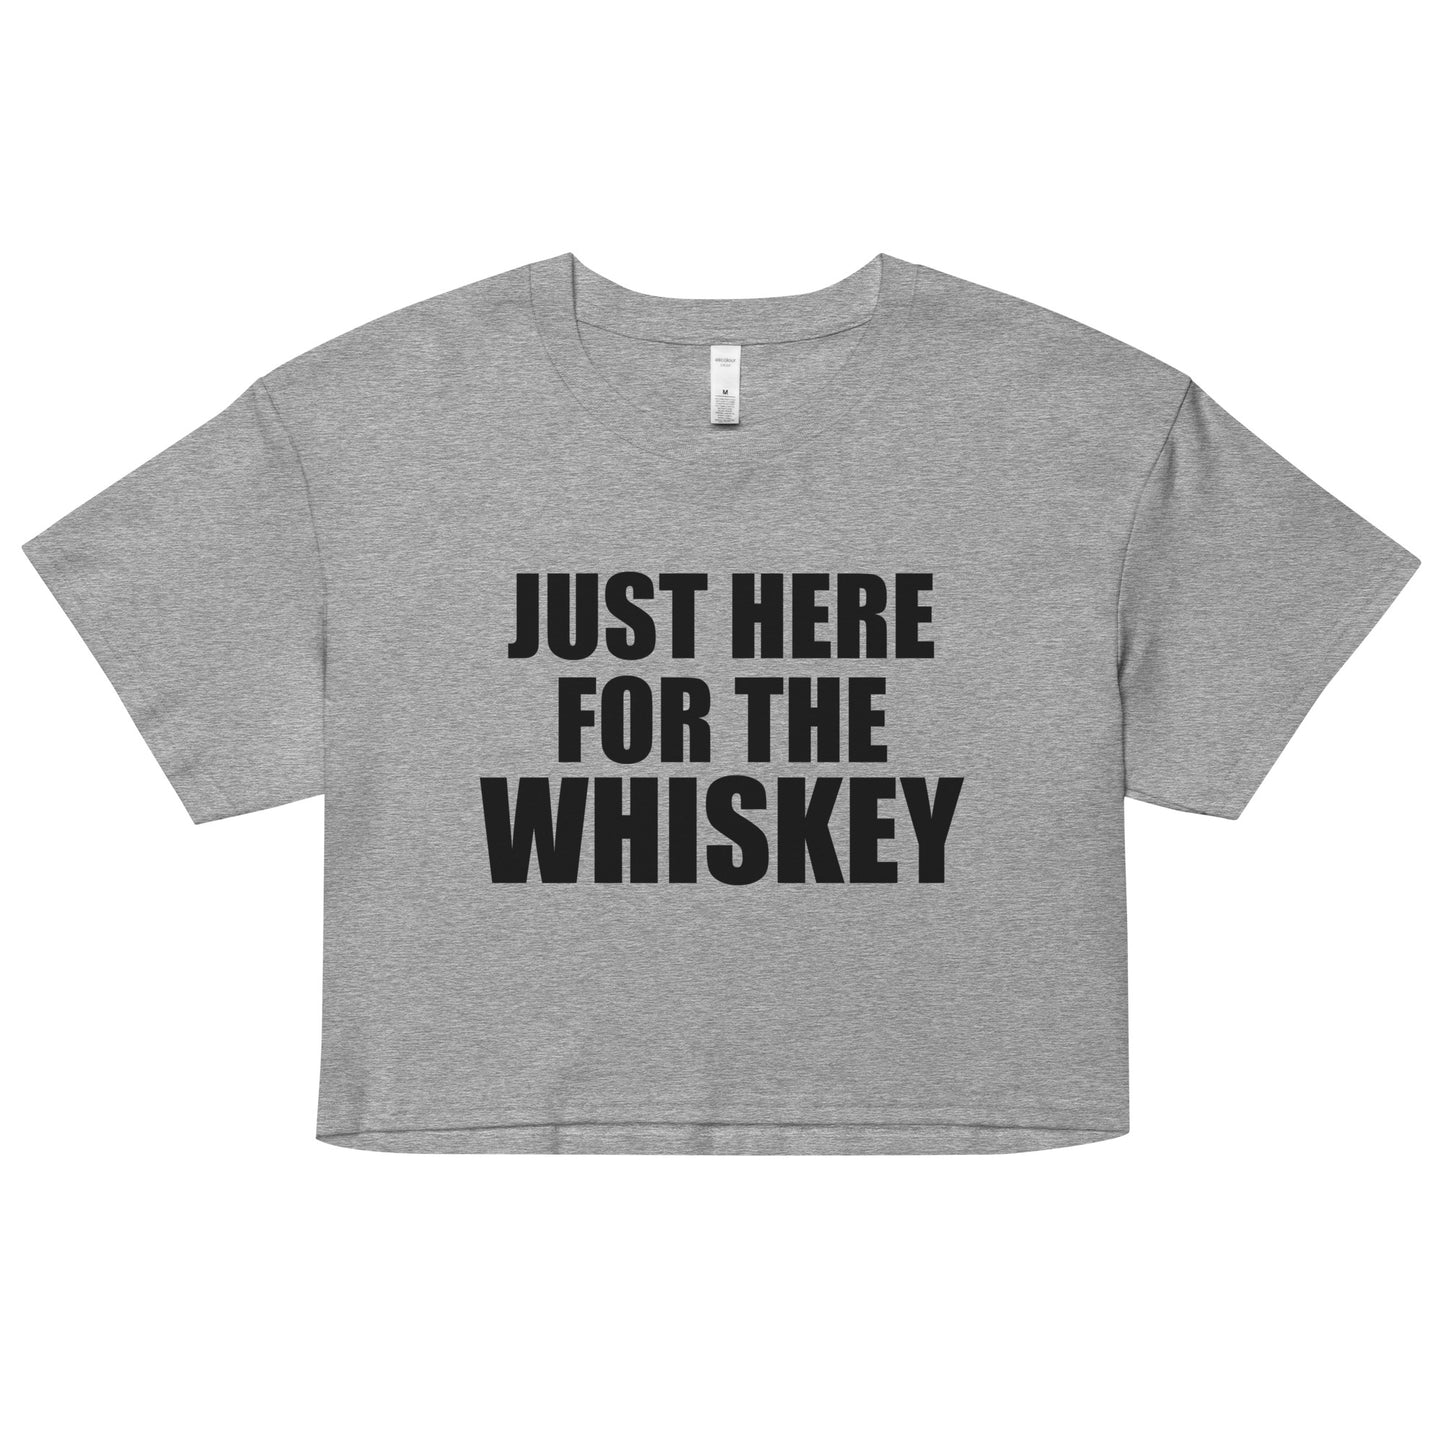 JUST HERE FOR THE WHISKEY / AND NONE OF THE BULLSHIT - Women’s crop top